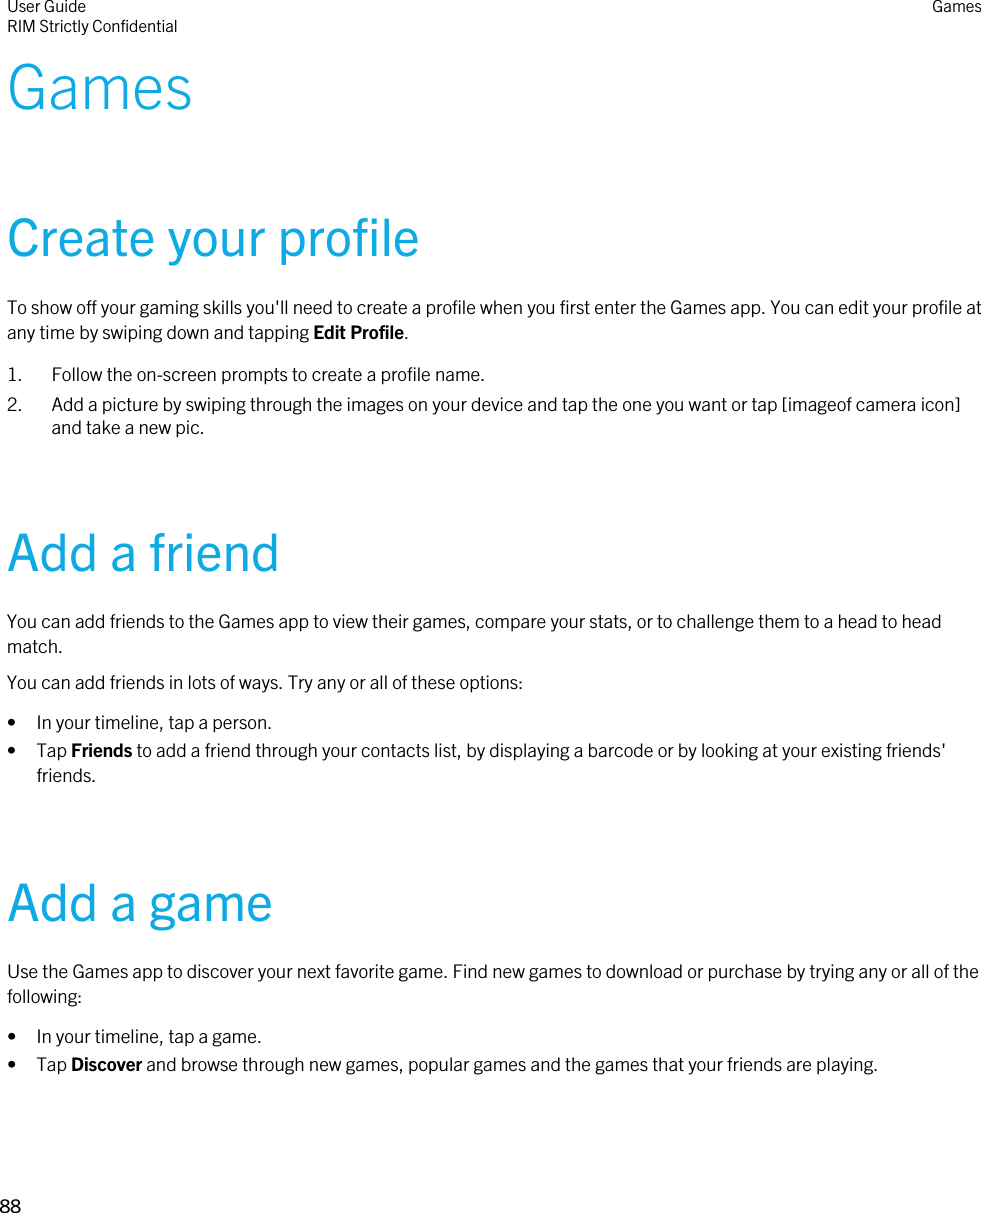 GamesCreate your profileTo show off your gaming skills you&apos;ll need to create a profile when you first enter the Games app. You can edit your profile at any time by swiping down and tapping Edit Profile.1. Follow the on-screen prompts to create a profile name.2. Add a picture by swiping through the images on your device and tap the one you want or tap [imageof camera icon] and take a new pic.Add a friendYou can add friends to the Games app to view their games, compare your stats, or to challenge them to a head to head match.You can add friends in lots of ways. Try any or all of these options:• In your timeline, tap a person.• Tap Friends to add a friend through your contacts list, by displaying a barcode or by looking at your existing friends&apos; friends.Add a gameUse the Games app to discover your next favorite game. Find new games to download or purchase by trying any or all of the following:• In your timeline, tap a game.• Tap Discover and browse through new games, popular games and the games that your friends are playing.User GuideRIM Strictly Confidential Games88 